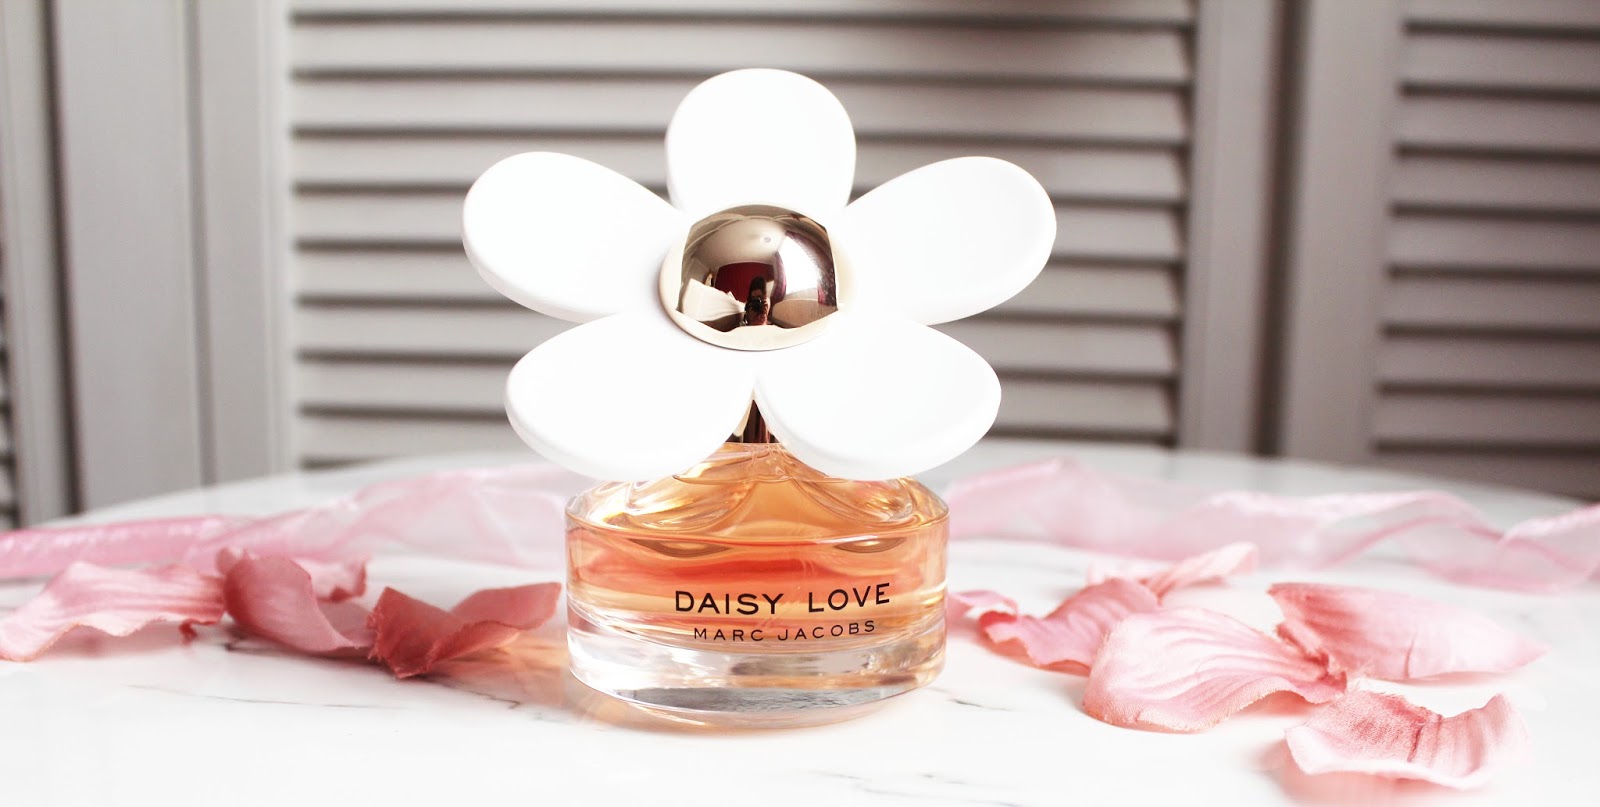 Marc Jacobs Daisy Love - Orchard.vn